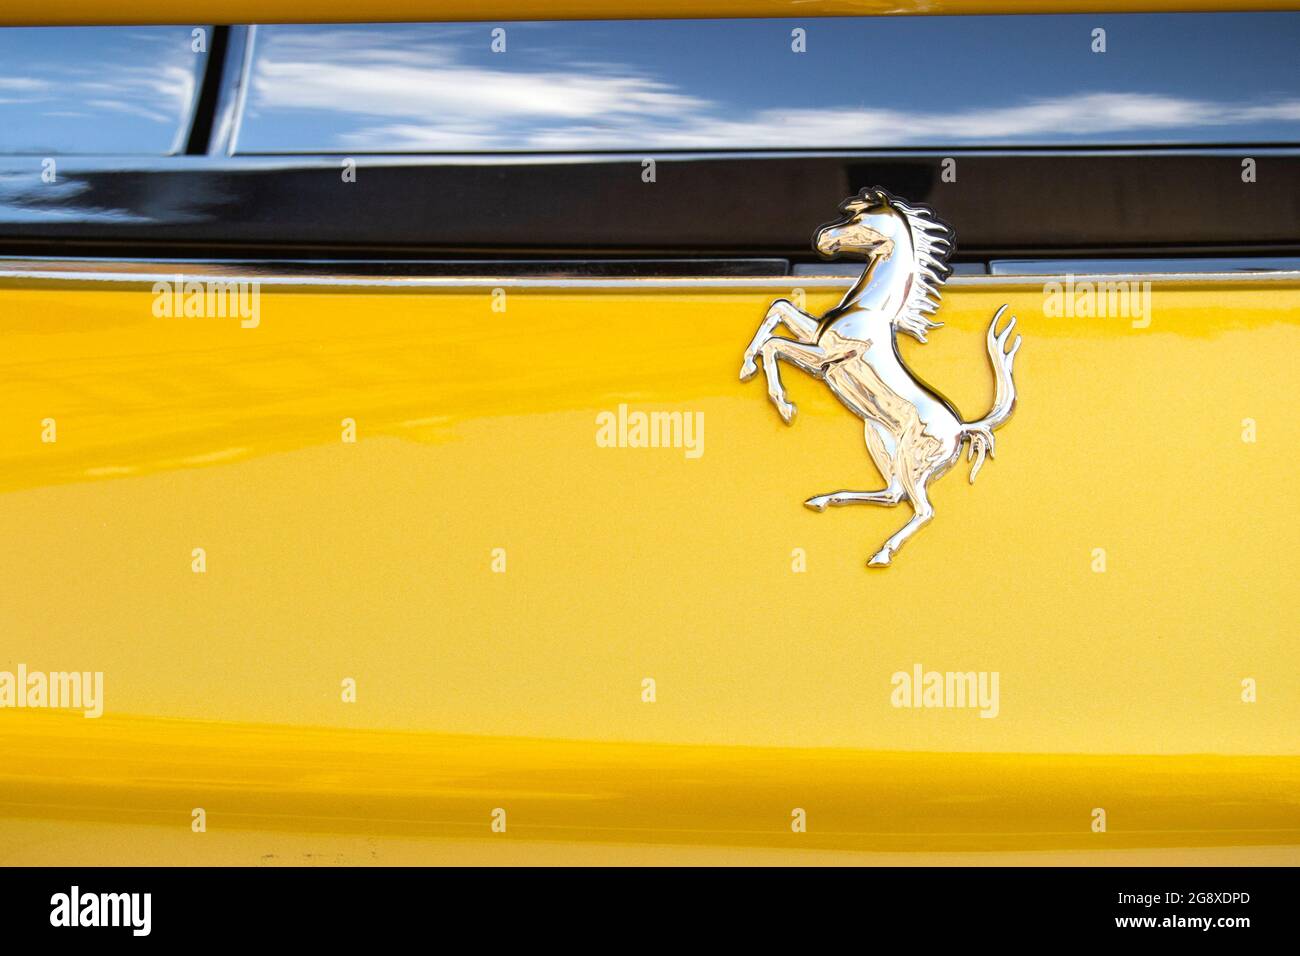 01-07-2021, Modena - Italy. Ferrari logo on sport car during Motor Valley Exibition 2021. concept for technology, luxury lifestyle, italian style, spe Stock Photo